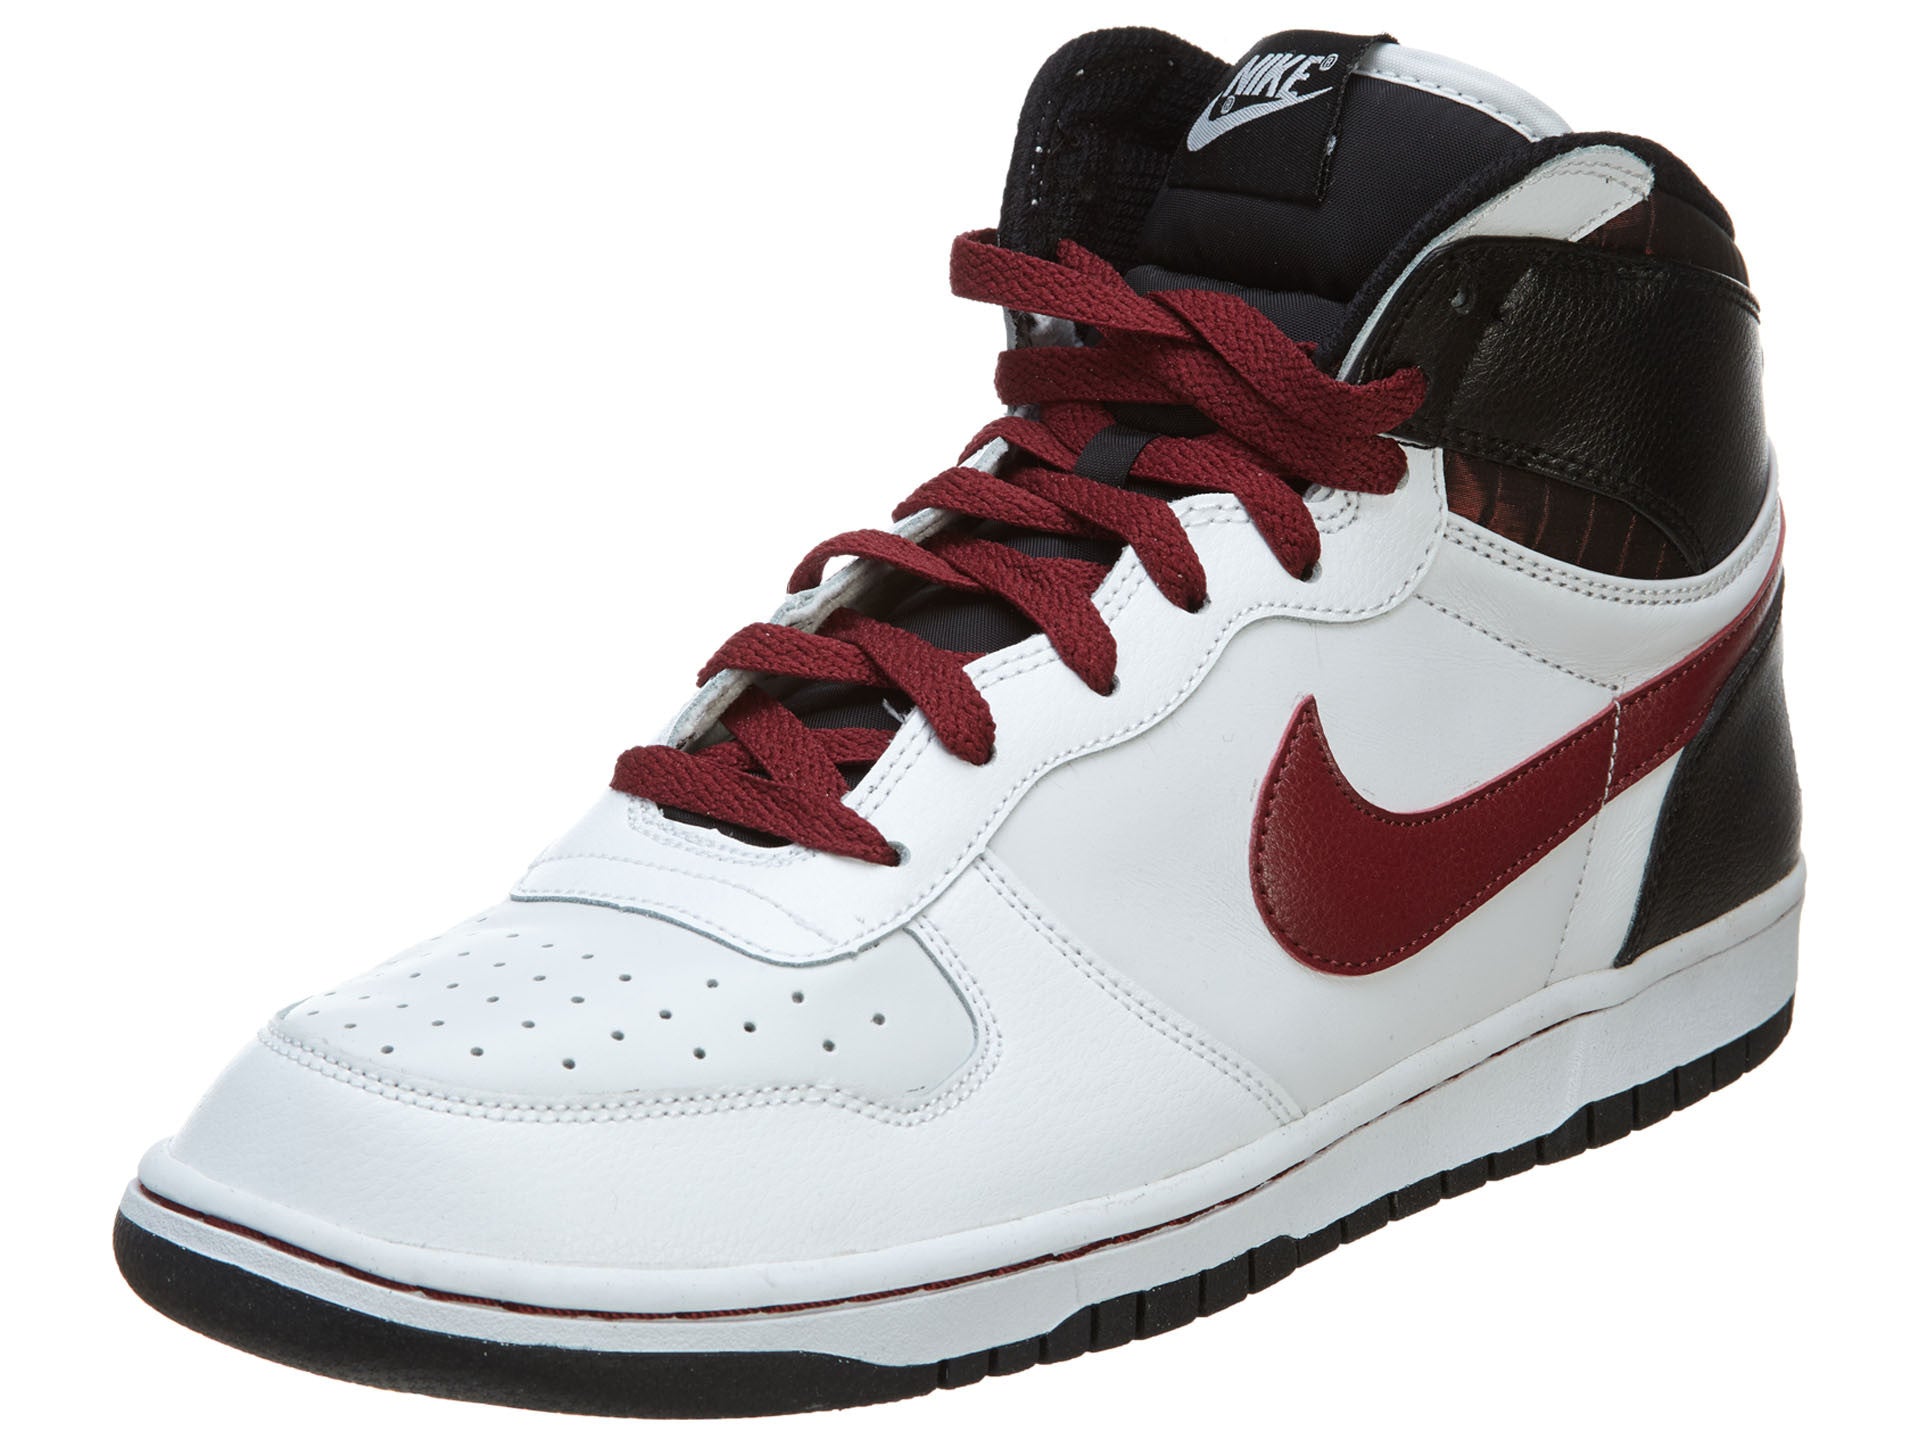 Apparel Accessories>Shoes>Athletic Shoes & Sneakers>Athletic Shoes>Basketball Shoes – Bar NYC